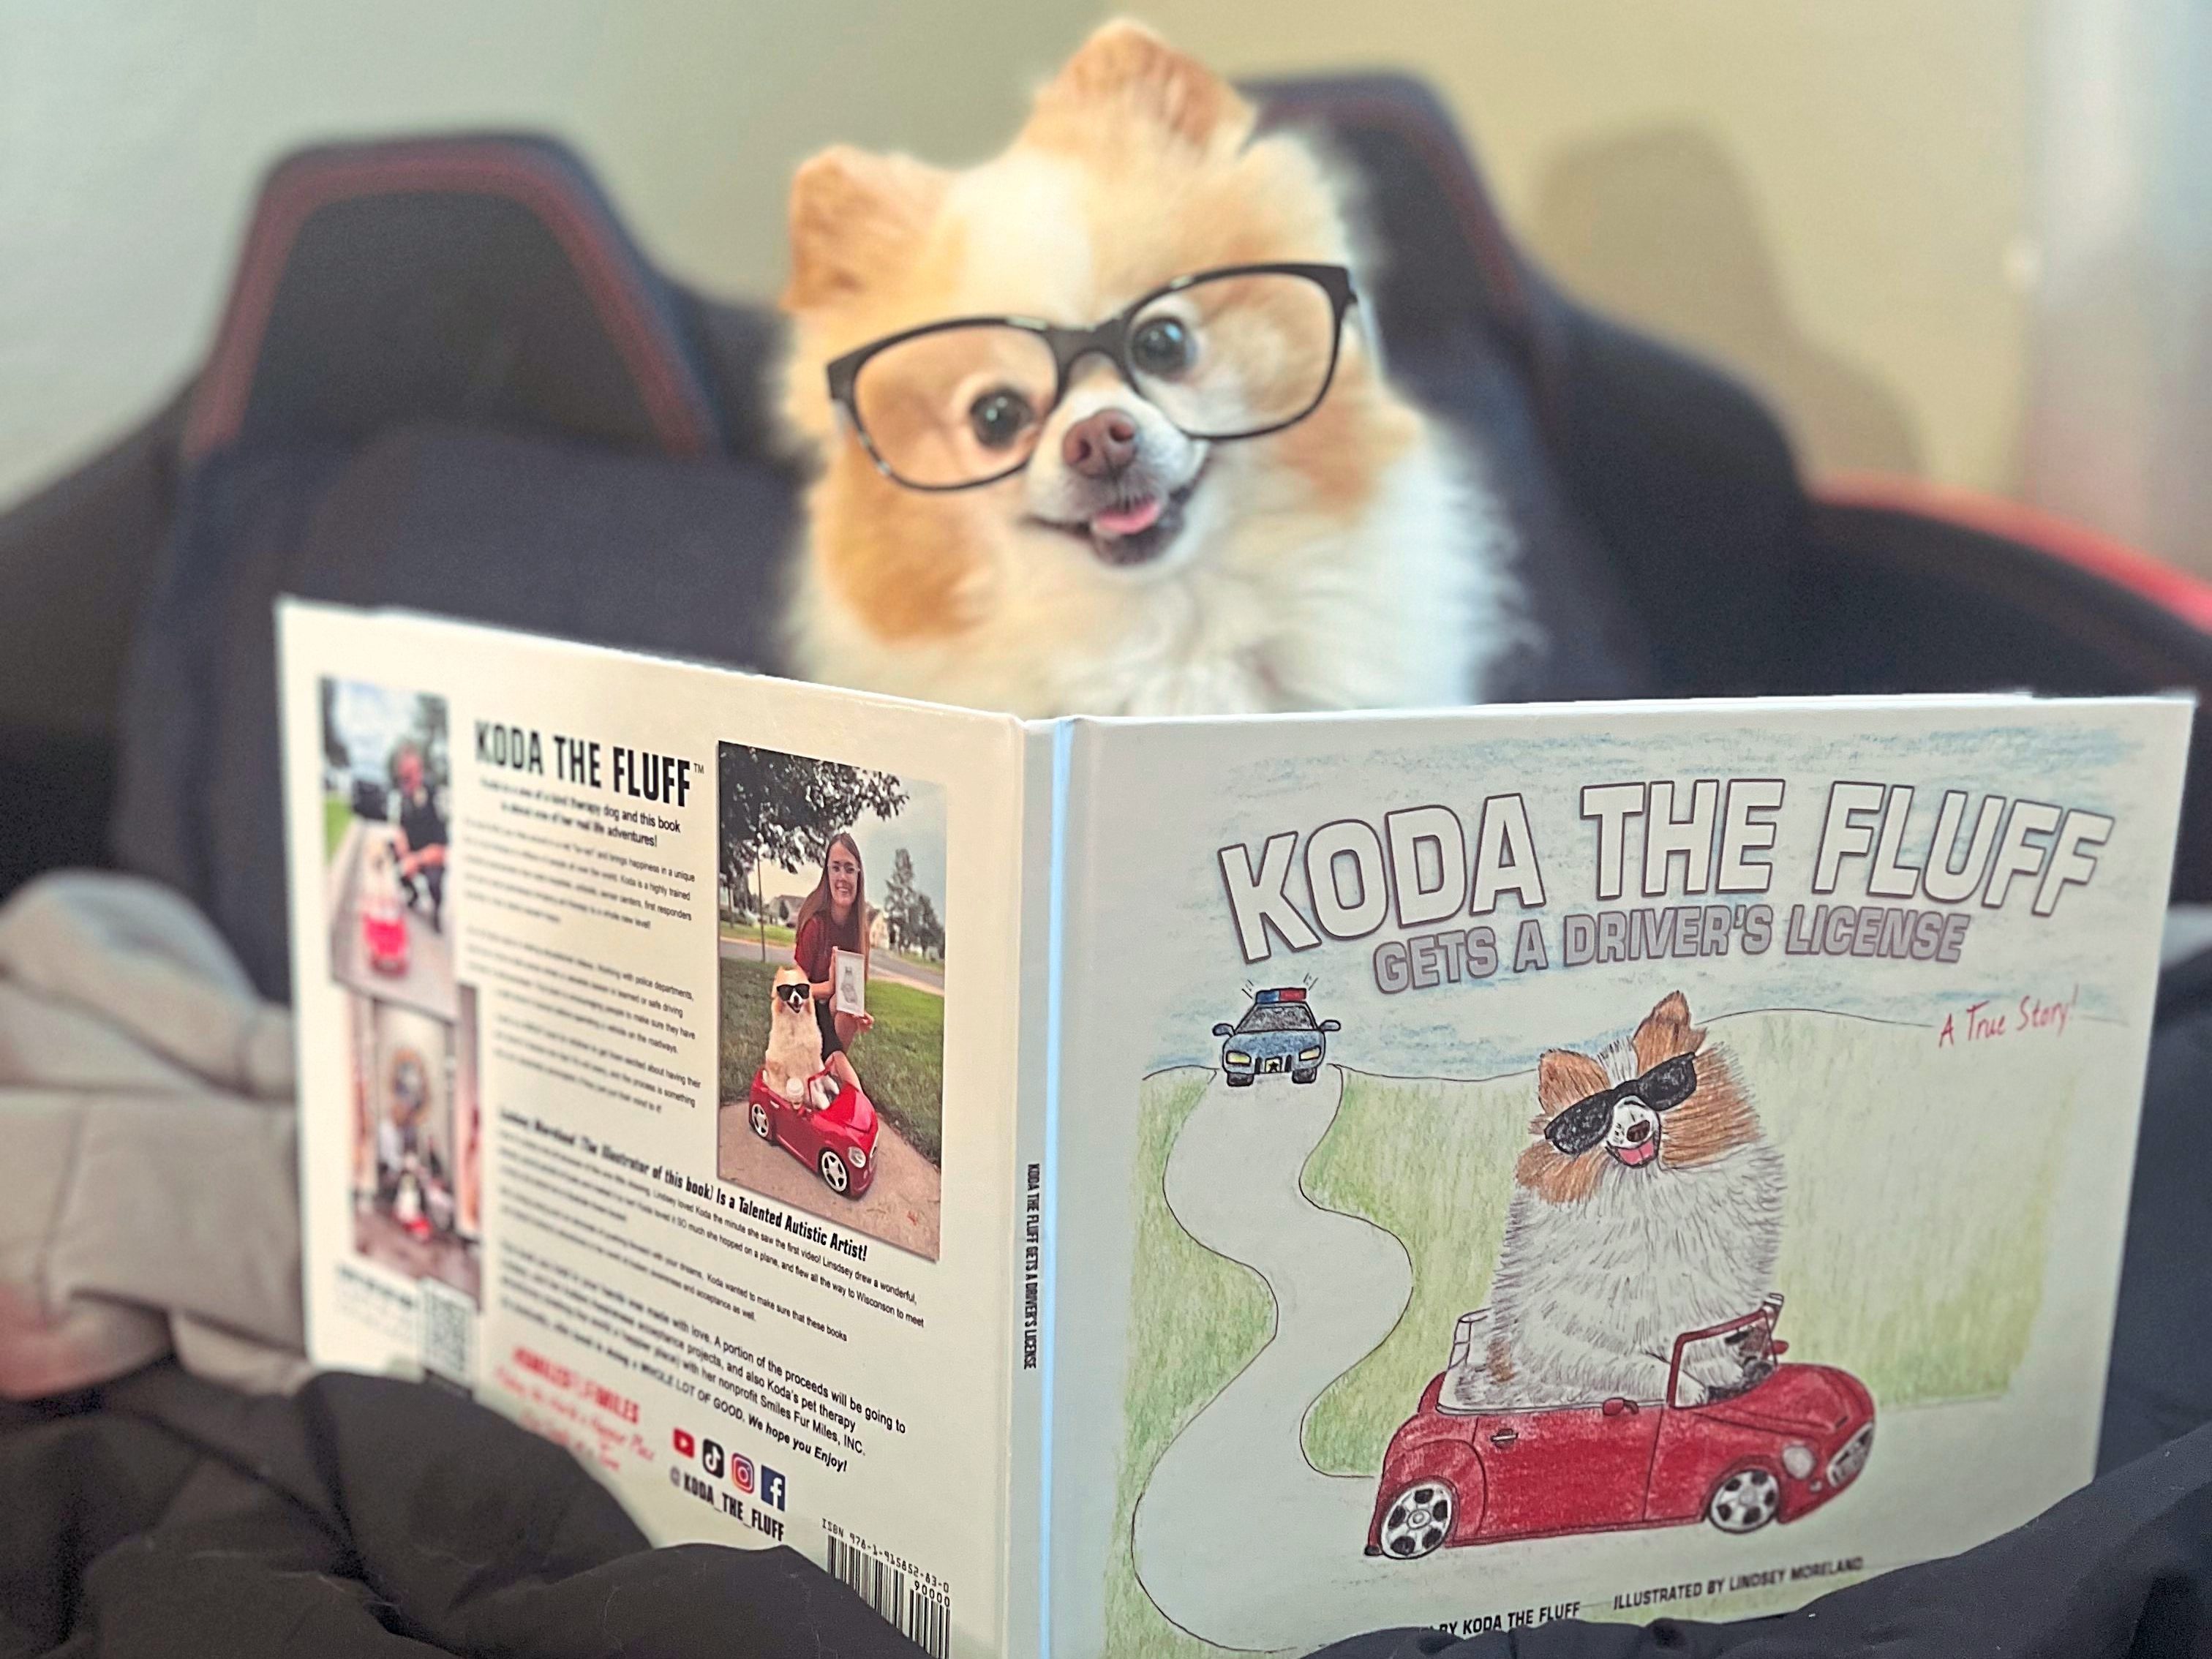 Koda the fluff and her book Animal Heroes